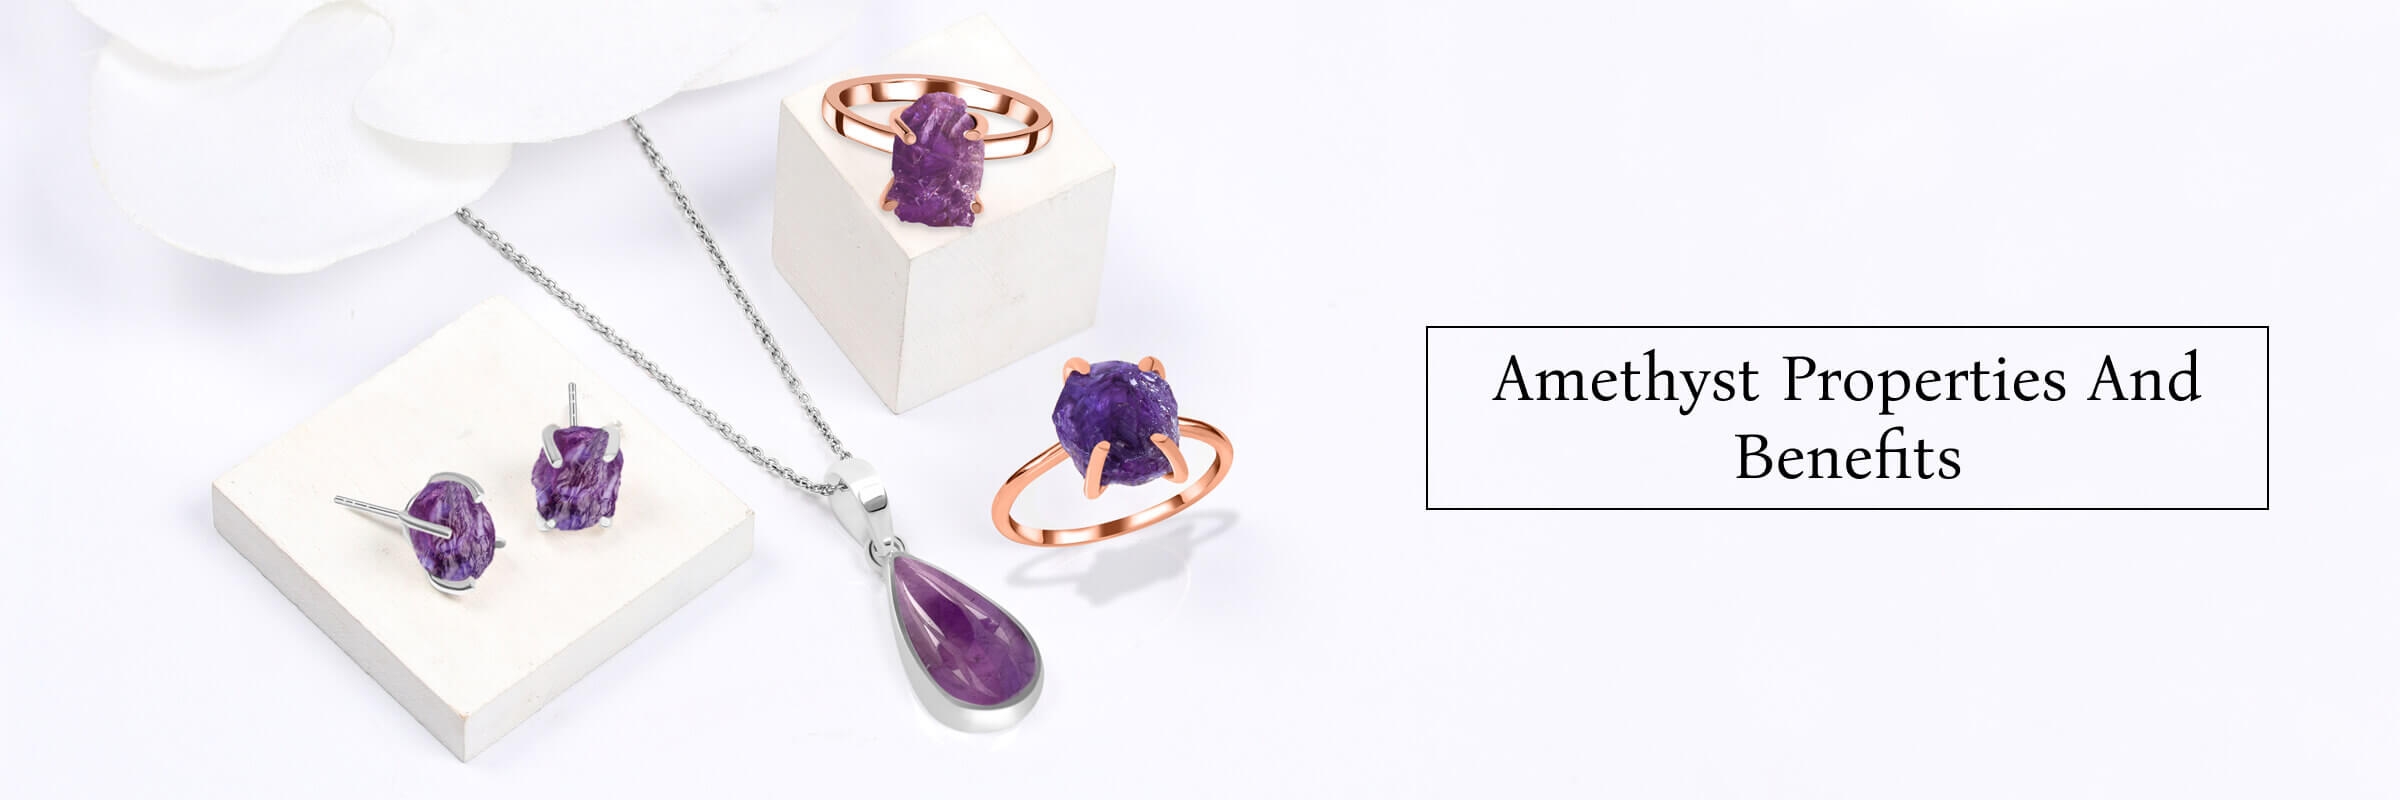 Amethyst Properties And Benefits